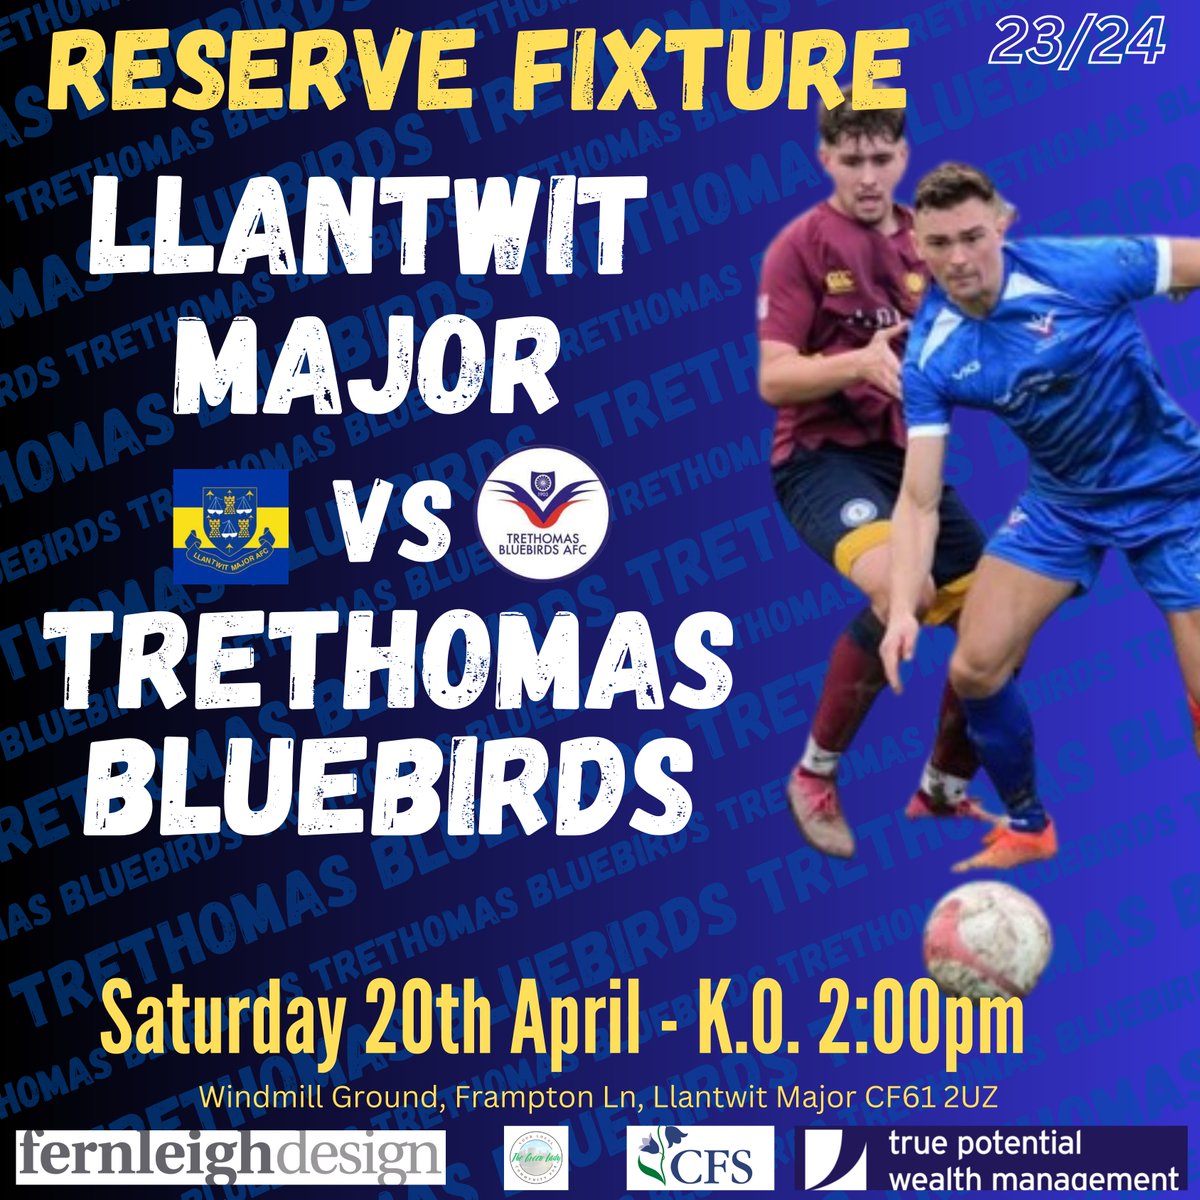 💙Reserve Team Fixture💙 With no game for the firsts this weekend you can still get your Bluebird fix as our reserves are away to @LlantwitMajorFC. Come and support the boys !! #UppaTre @FernleighDesign @TruePotential_ @CaerphillyFS wwww.greenladypubcaerphilly.co.uk